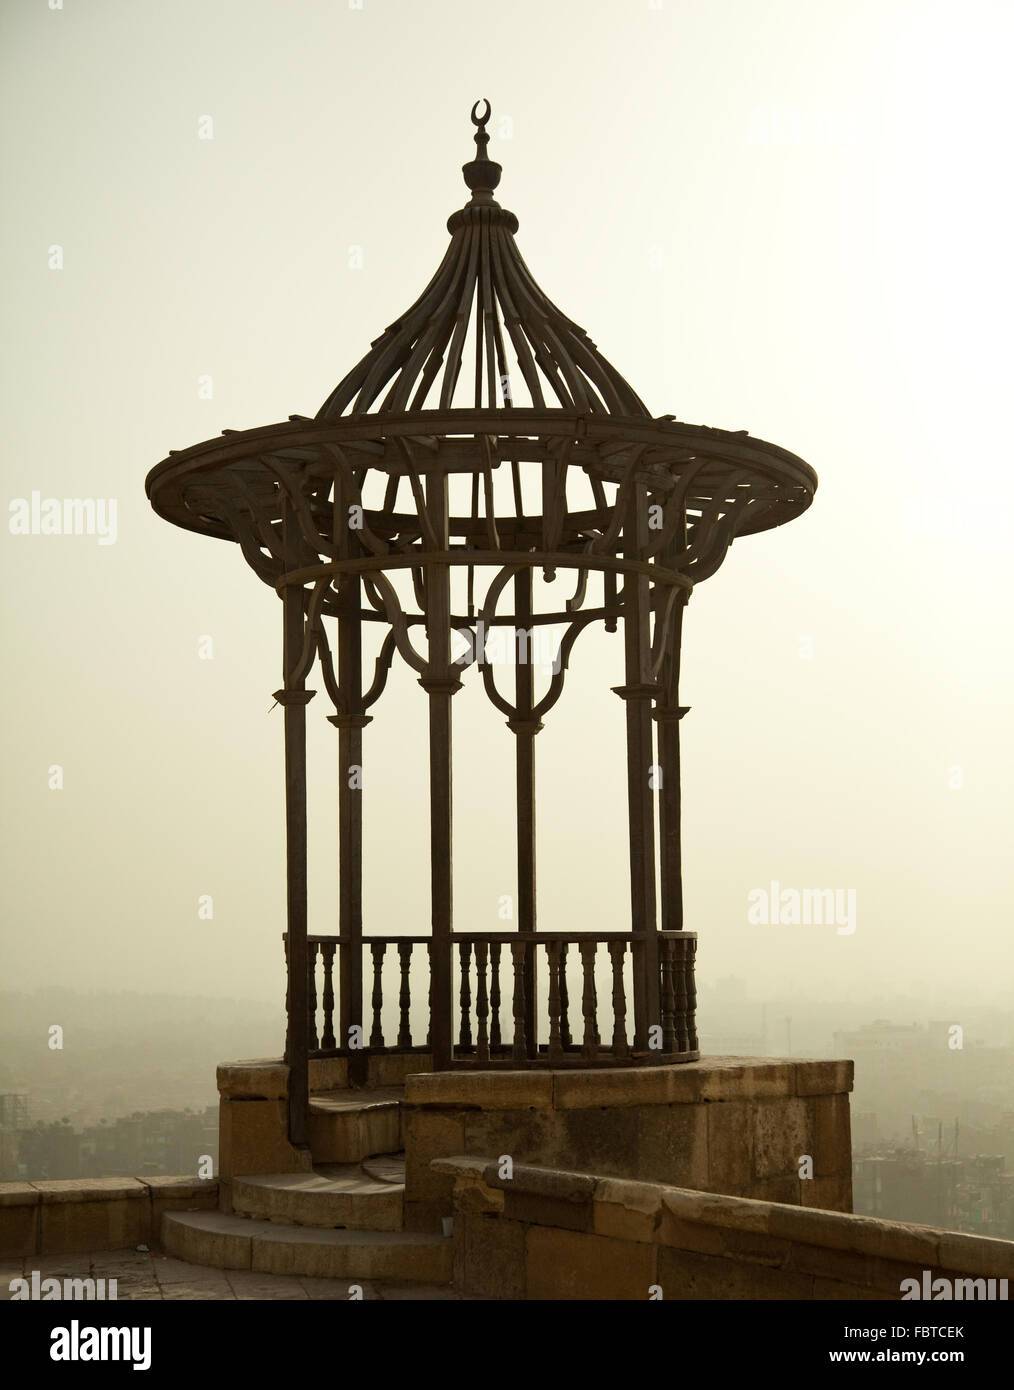 Old iron viewing place in the Citadel in Cairo in Egypt overlooking a misty and smoggy city Stock Photo